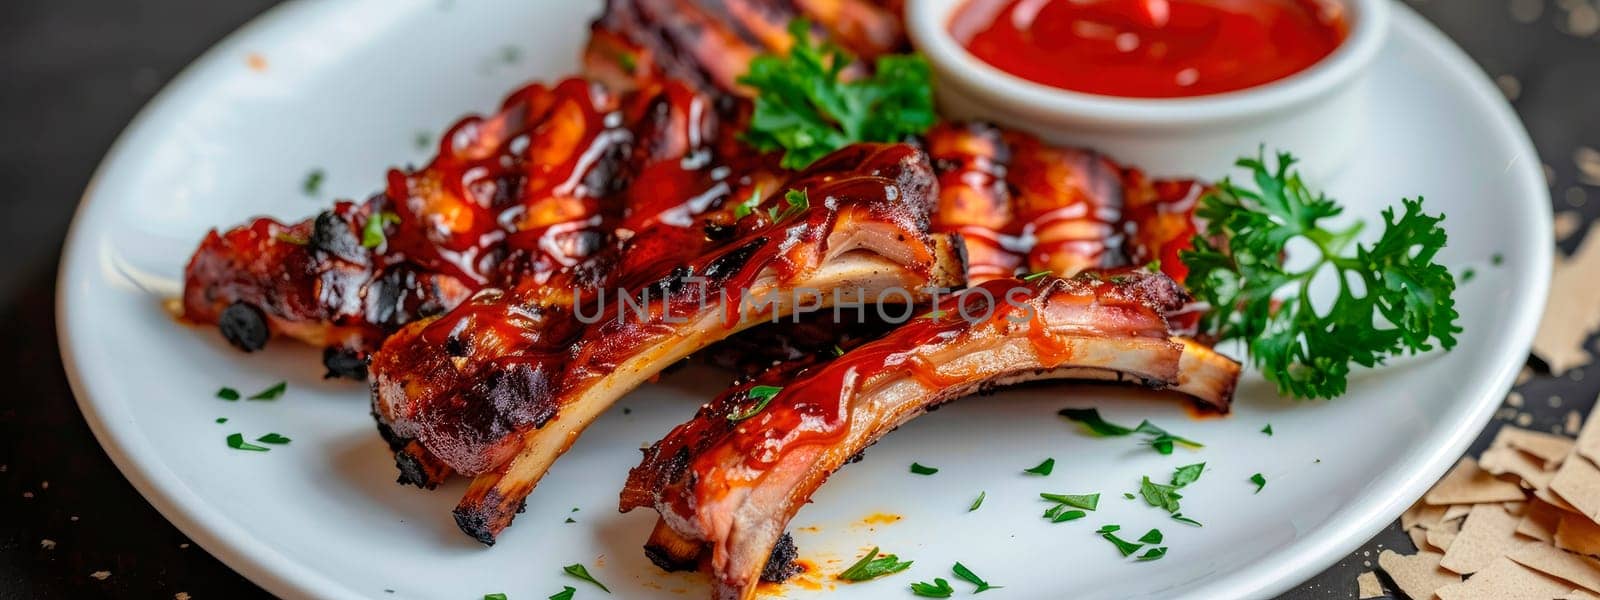 ribs in sauce on a plate. selective focus. food.